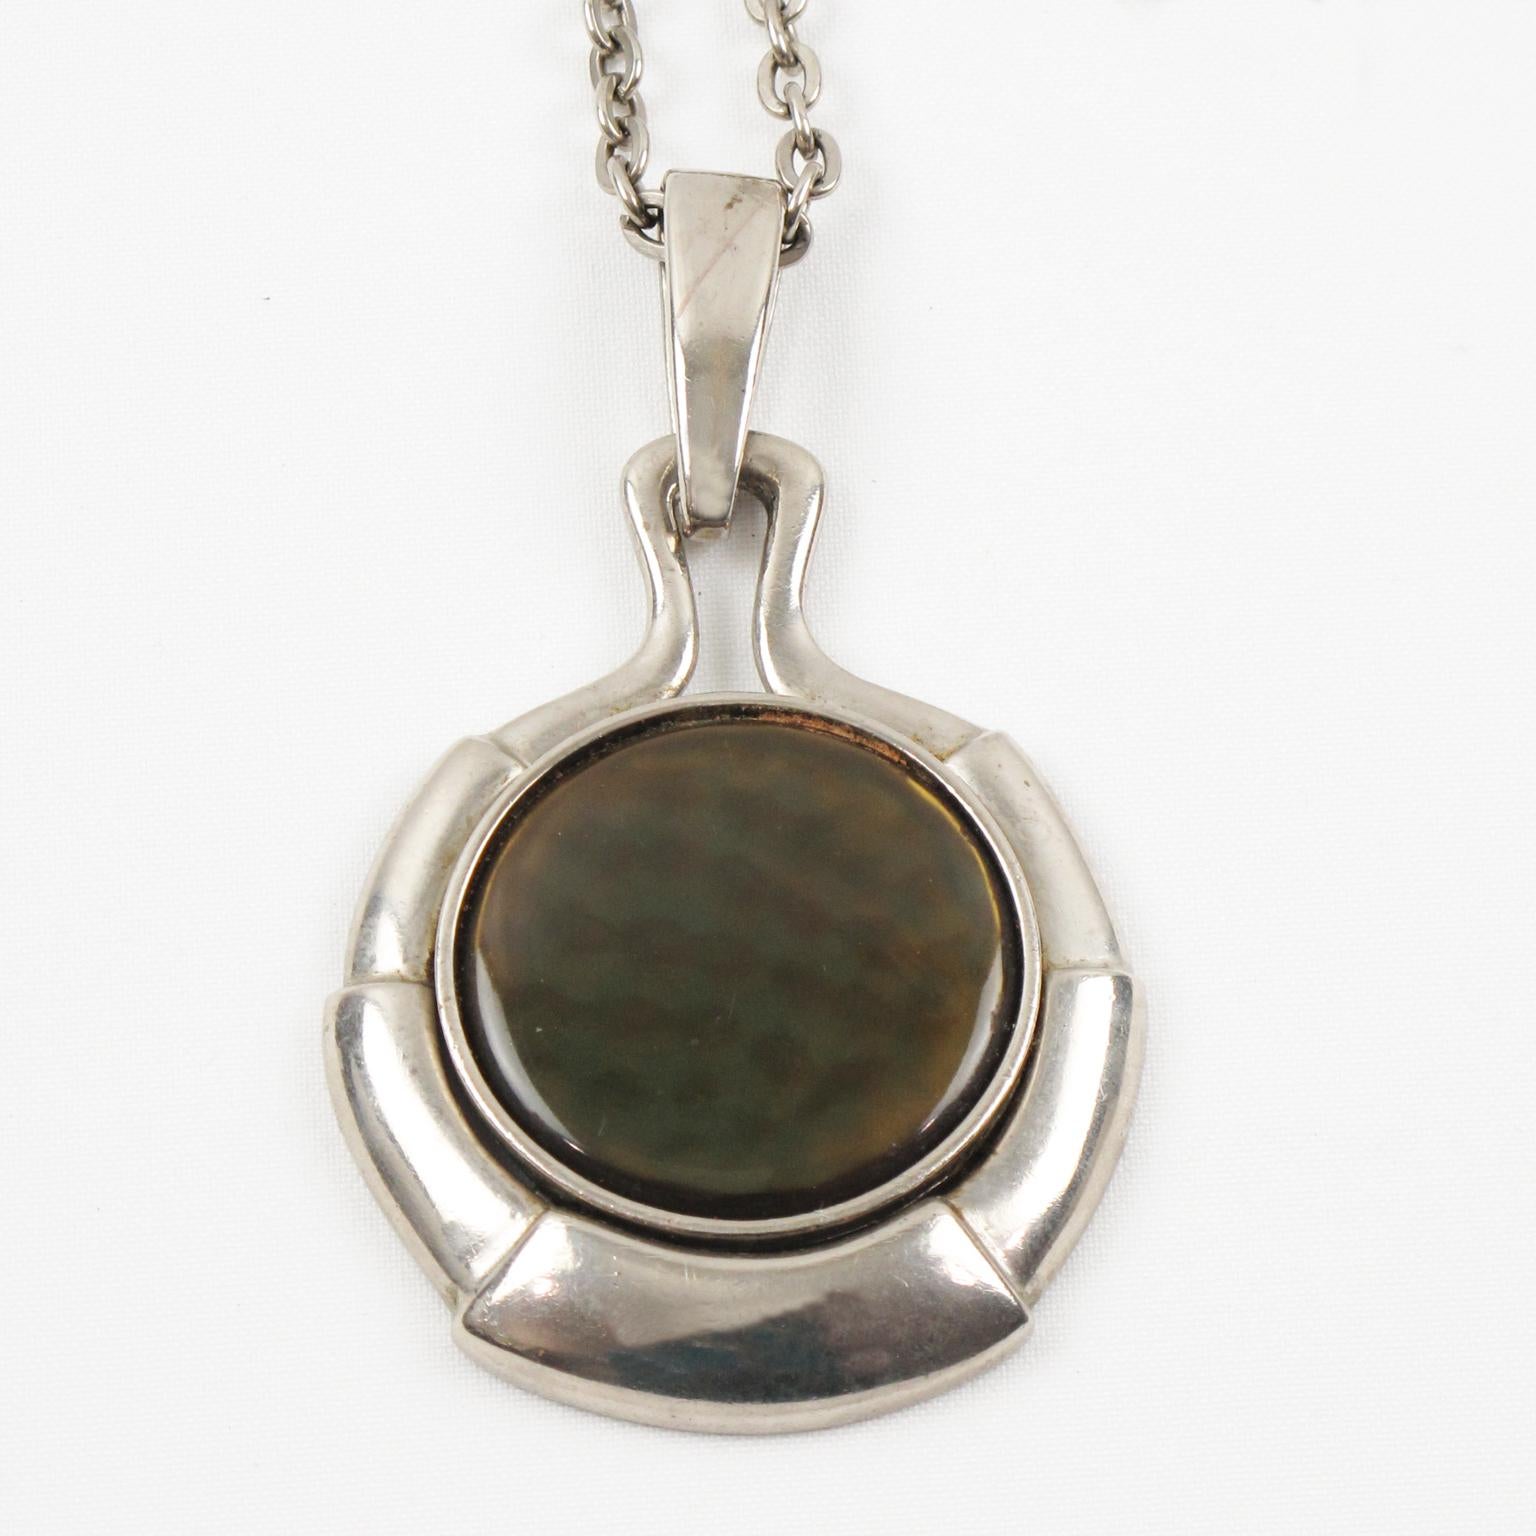 Women's or Men's Space Age Modernist Necklace Green Iridescent Resin Pendant For Sale